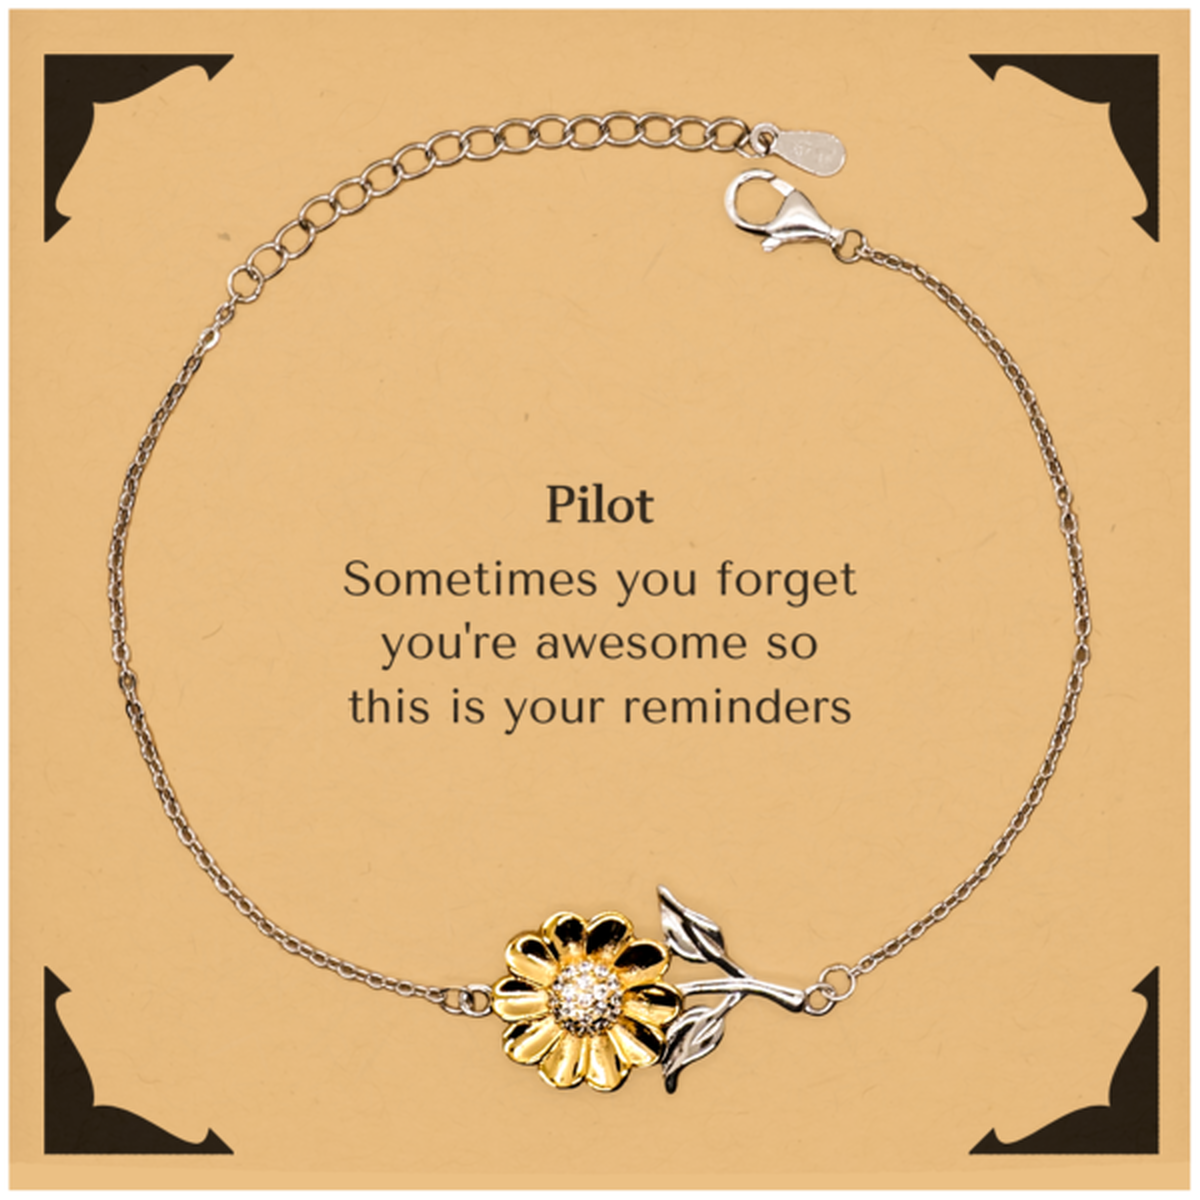 Sentimental Pilot Sunflower Bracelet, Pilot Sometimes you forget you're awesome so this is your reminders, Graduation Christmas Birthday Gifts for Pilot, Men, Women, Coworkers